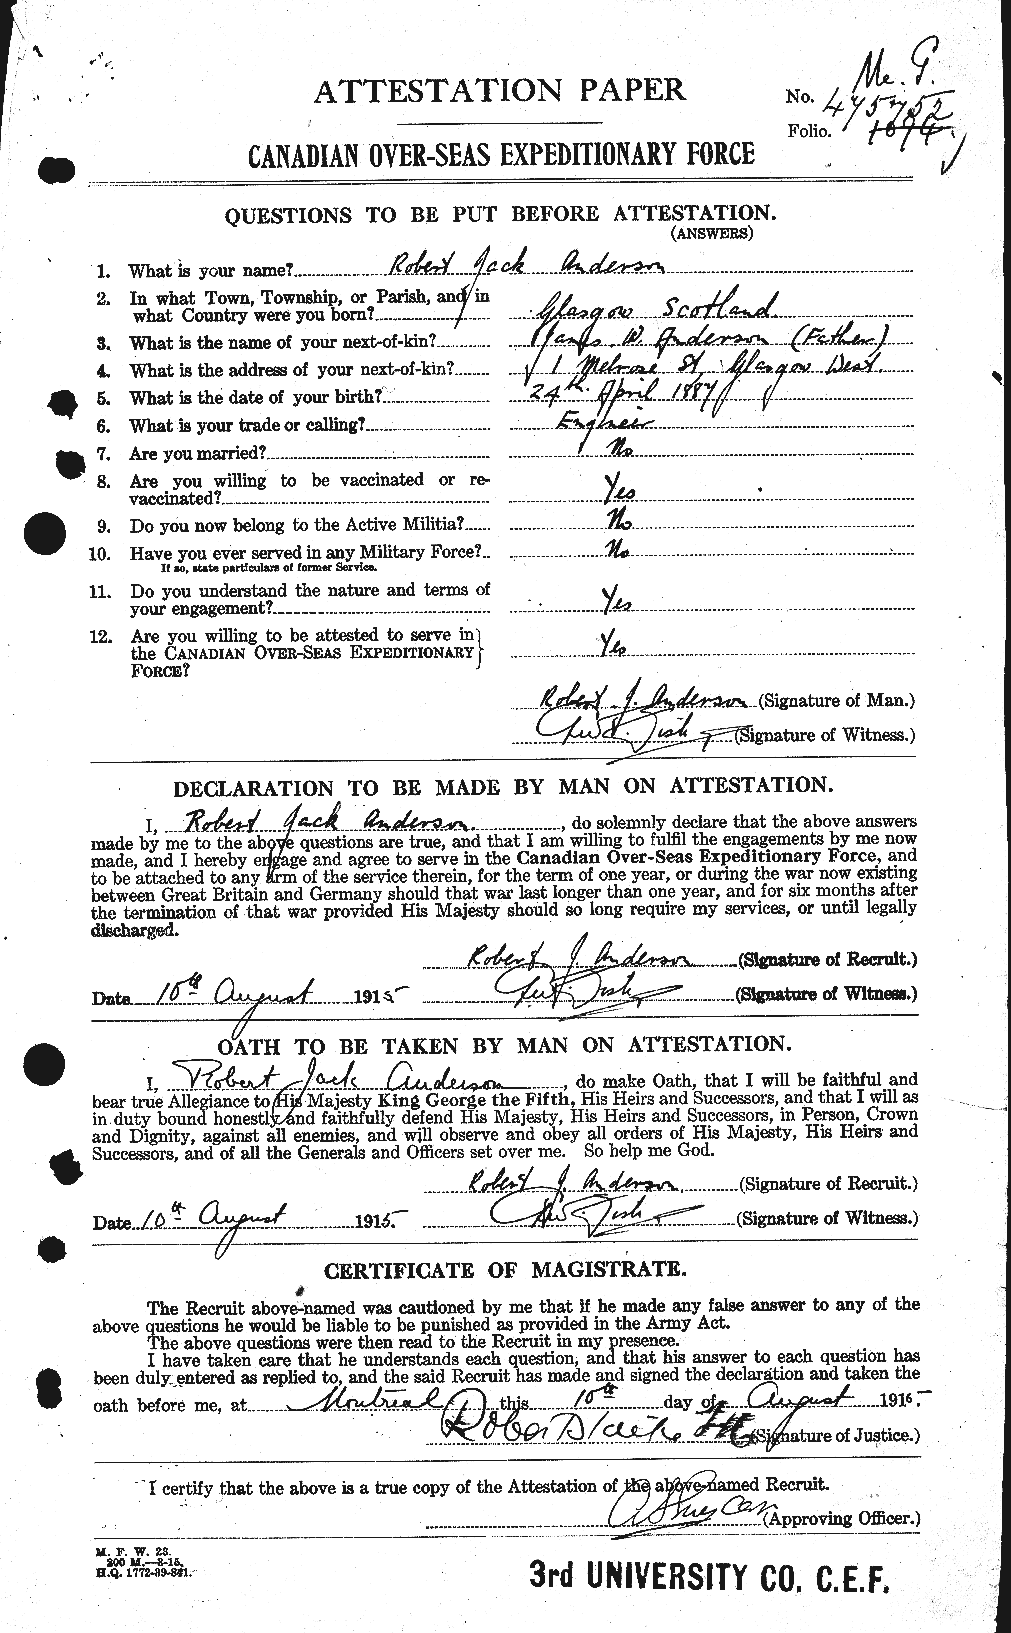 Personnel Records of the First World War - CEF 207246a